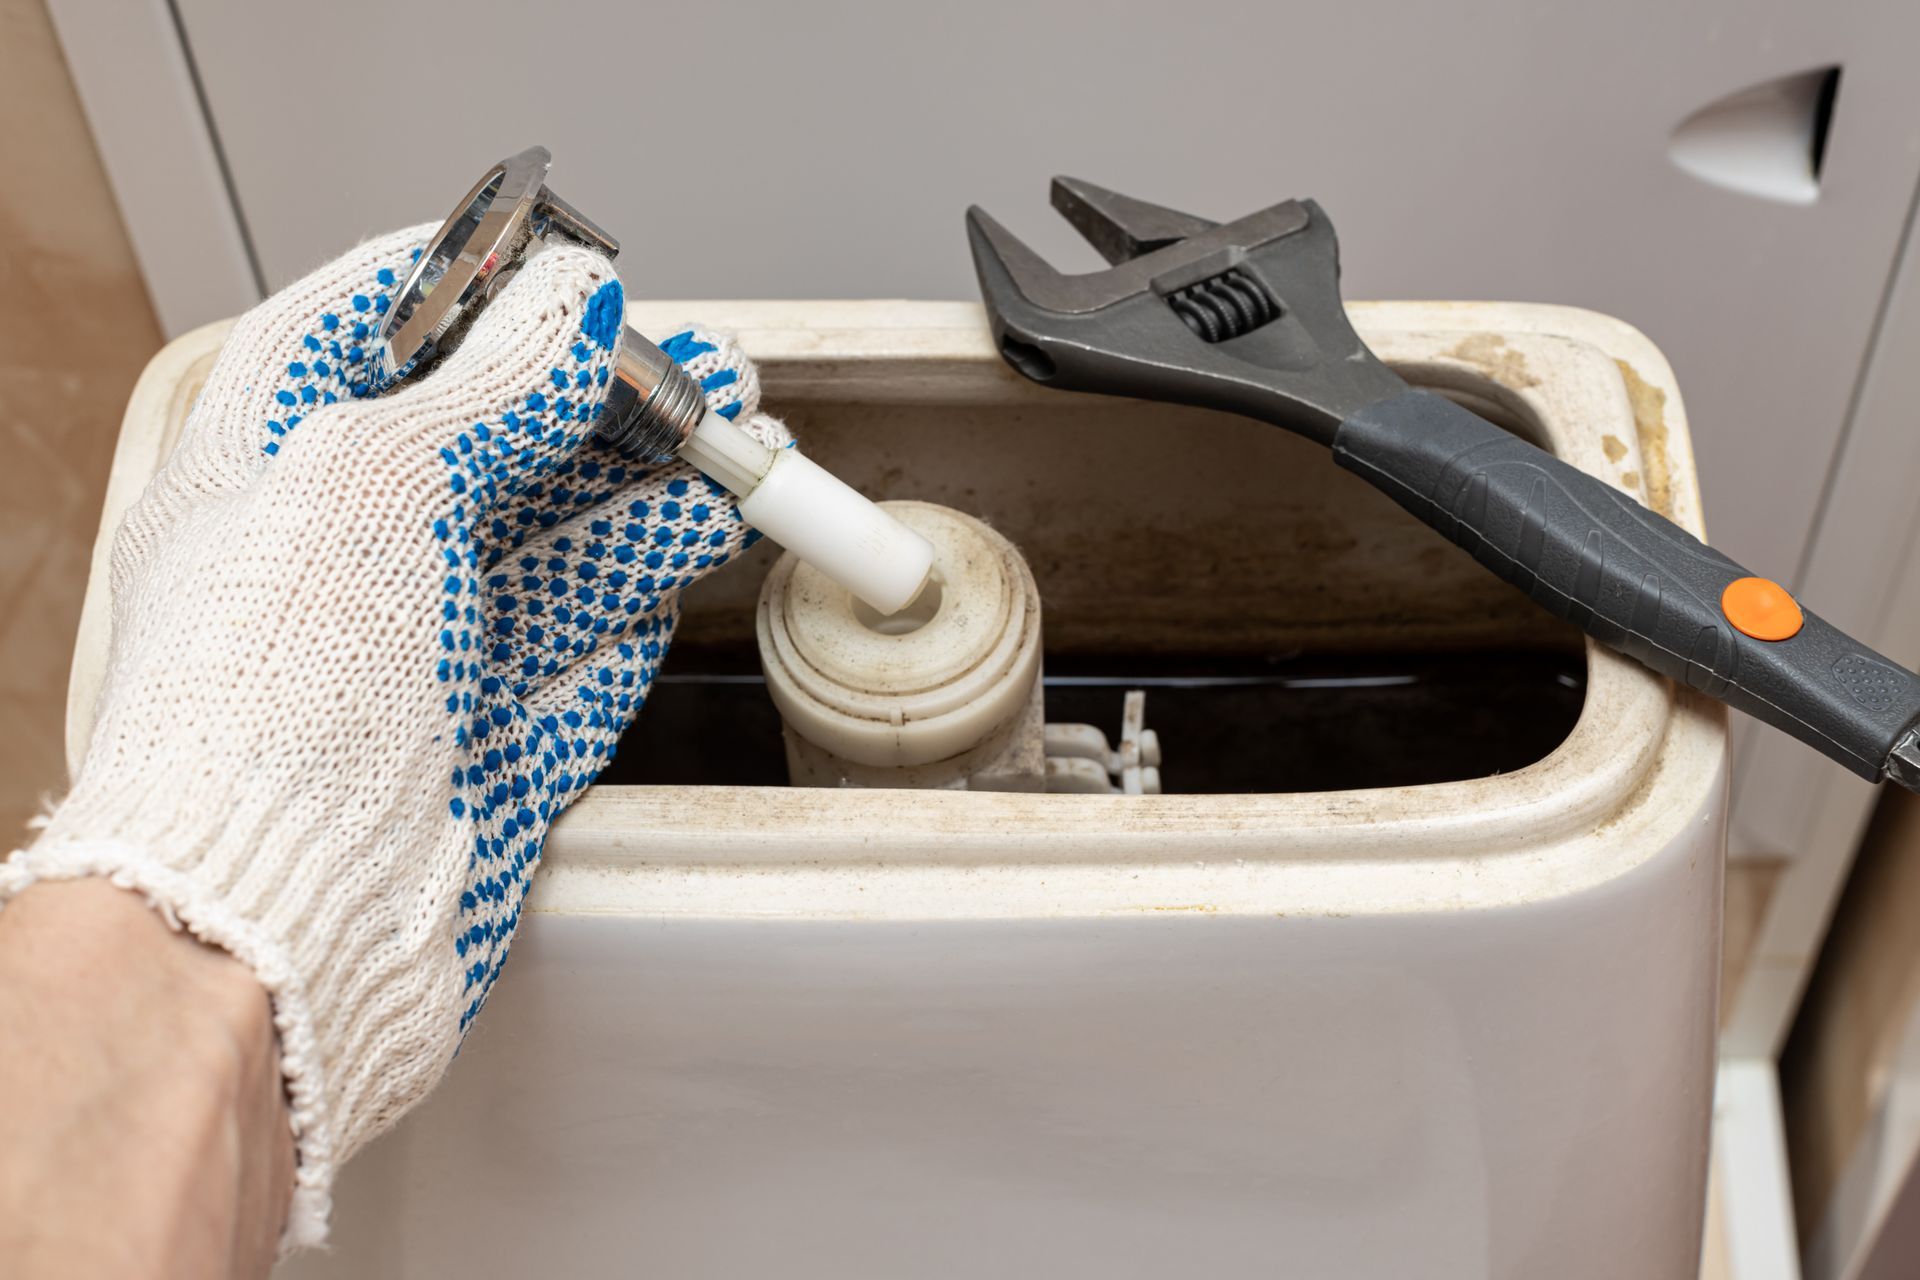 repair or replace toilet in your home